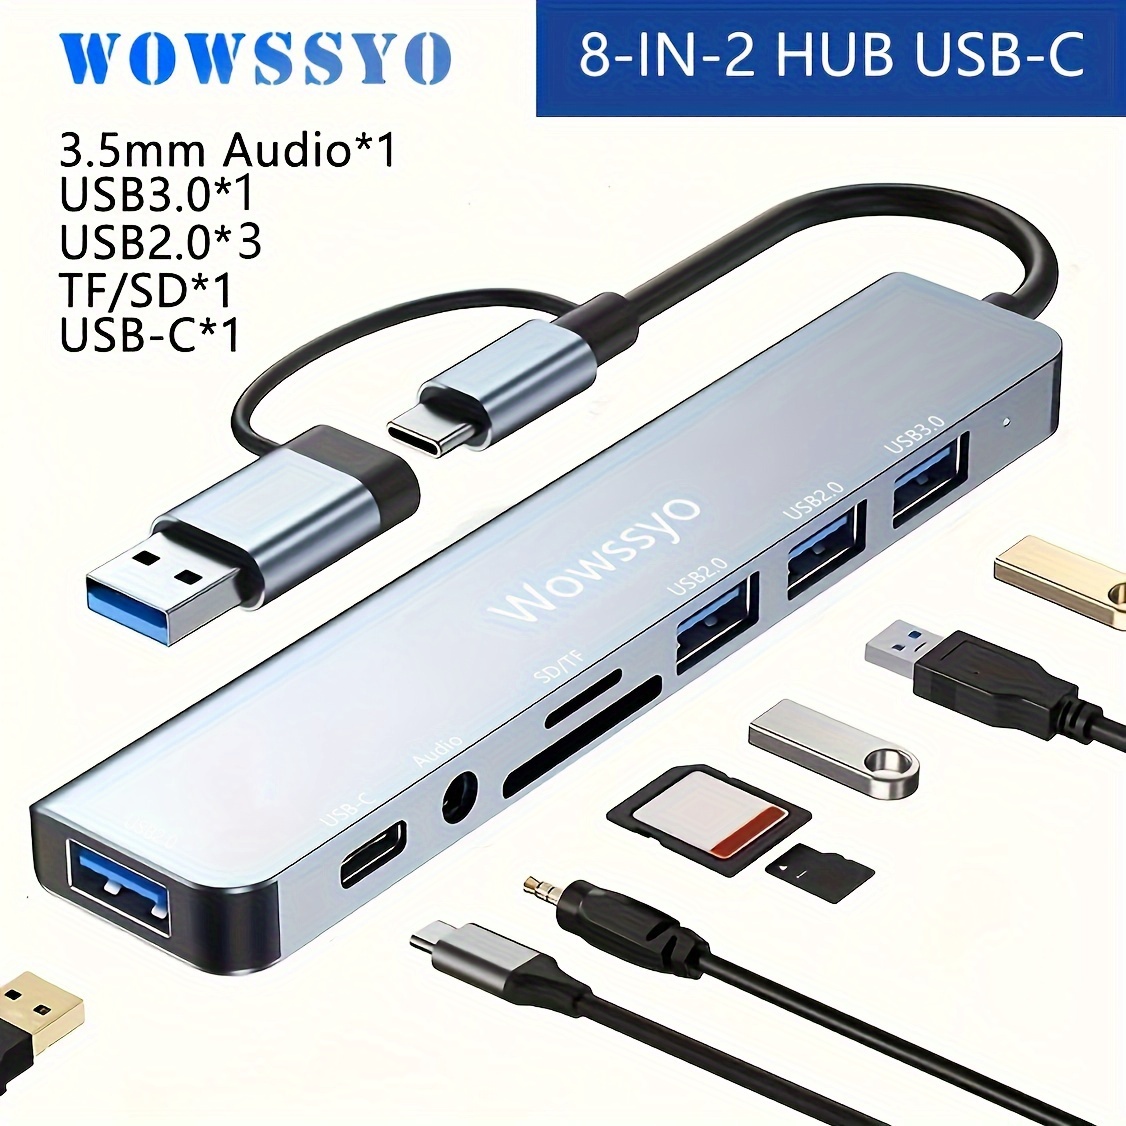 

Wowssyo 8 In 1, Usb C Adapter For Pro/air, Hdtv 4k, Sd/tf Audio Usb 3.0/ 2.0, For Pro M1, Xps, Pro7/pro X Chromebook Samsung, Pc Laptops